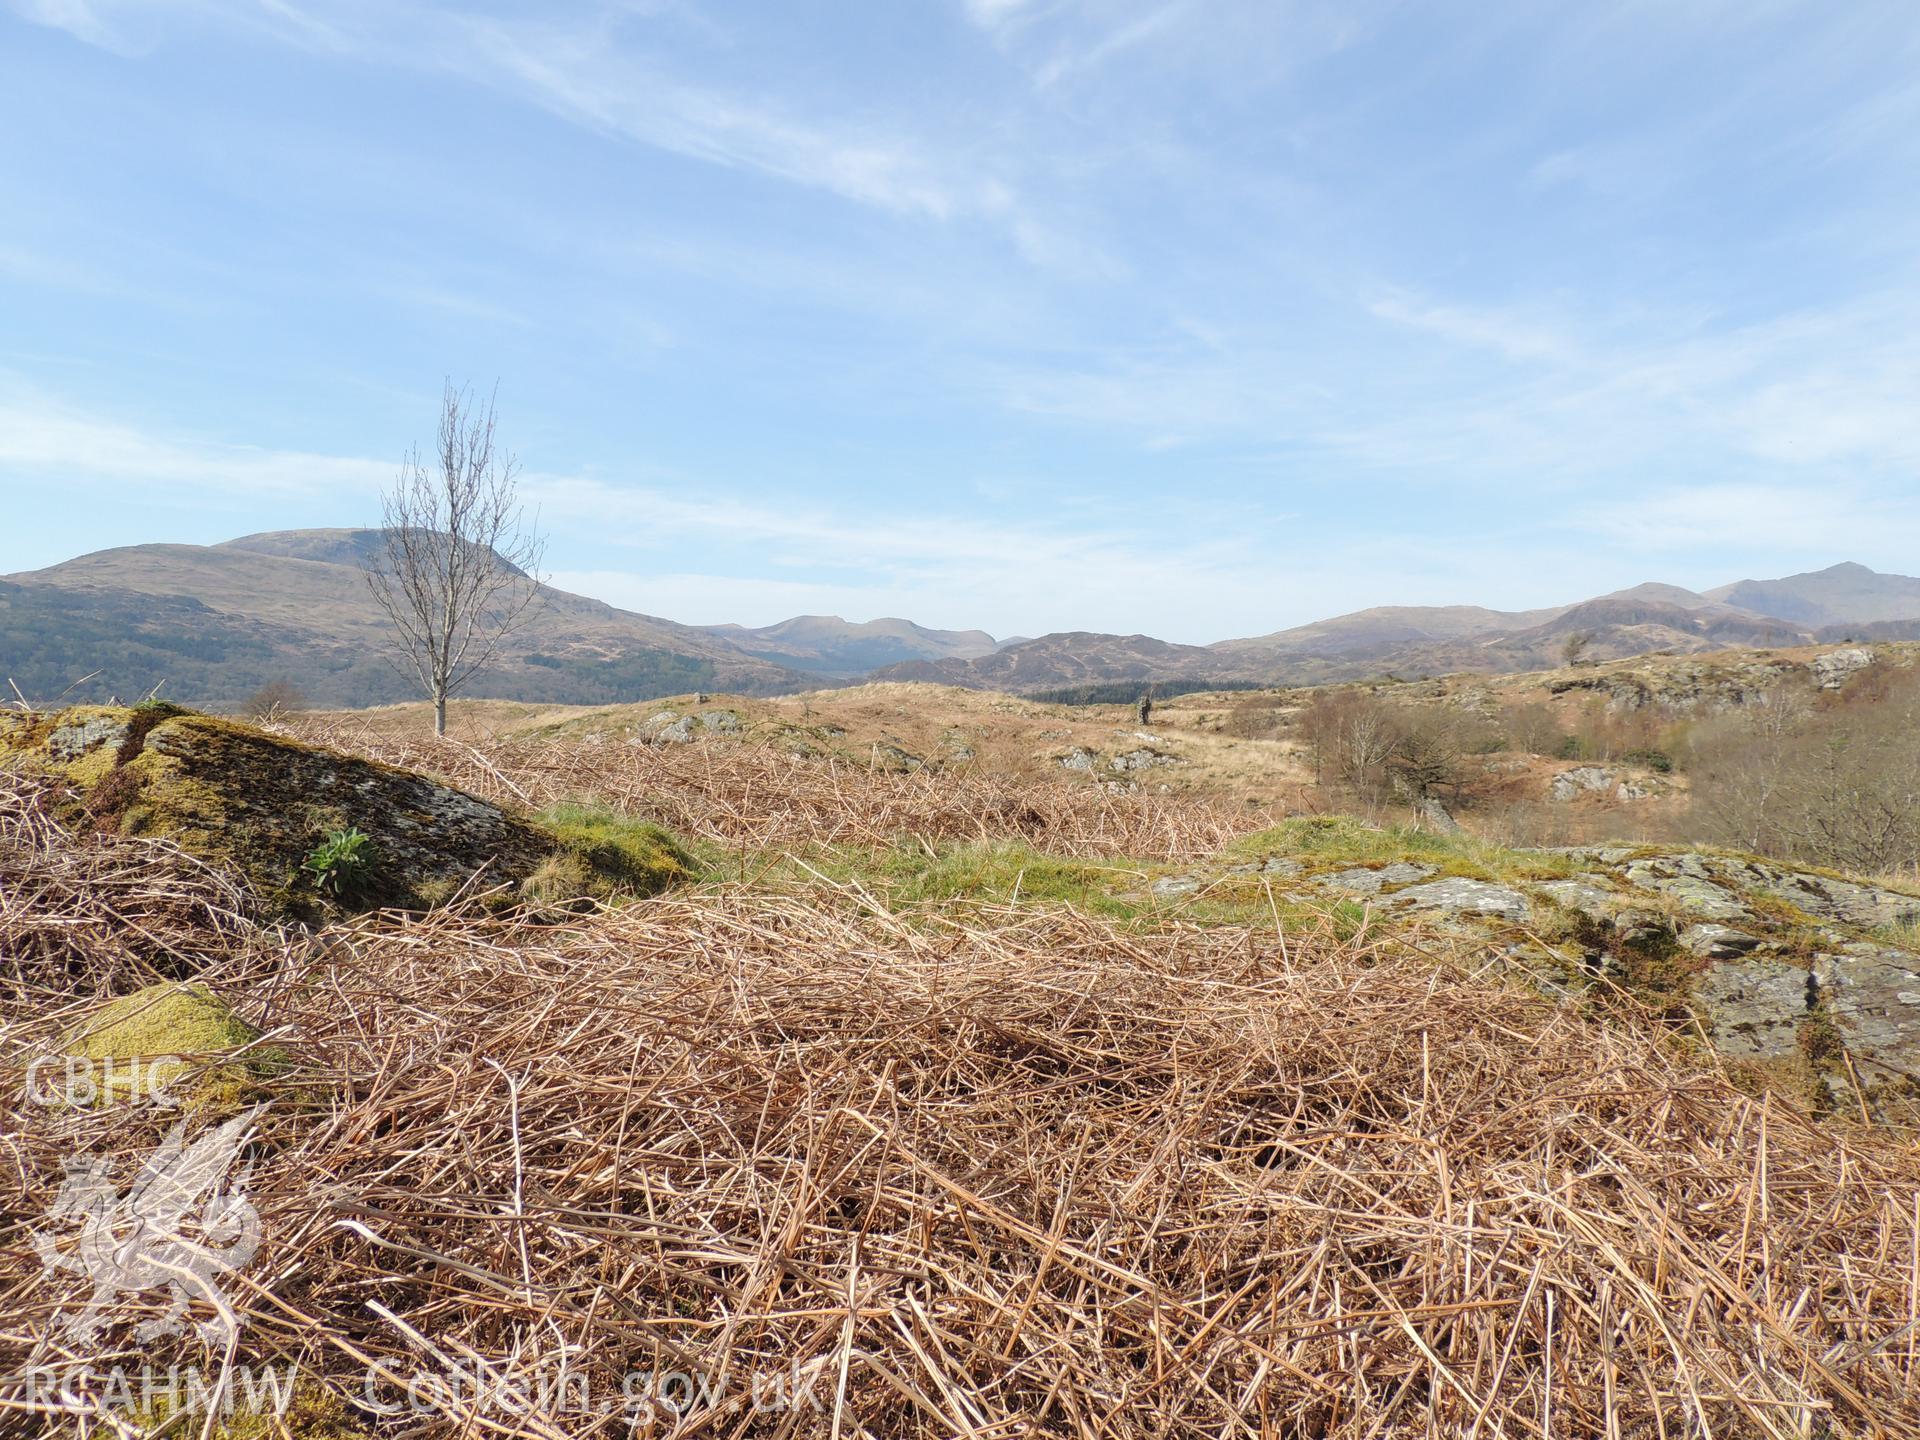 'View towards penstock route from SH62096 43897. Looking east south-east.' Photographed as part of desk based assessment and heritage impact assessment of a hydro scheme on the Afon Croesor, Brondanw Estate, Gwynedd. Produced by Archaeology Wales, 2018.